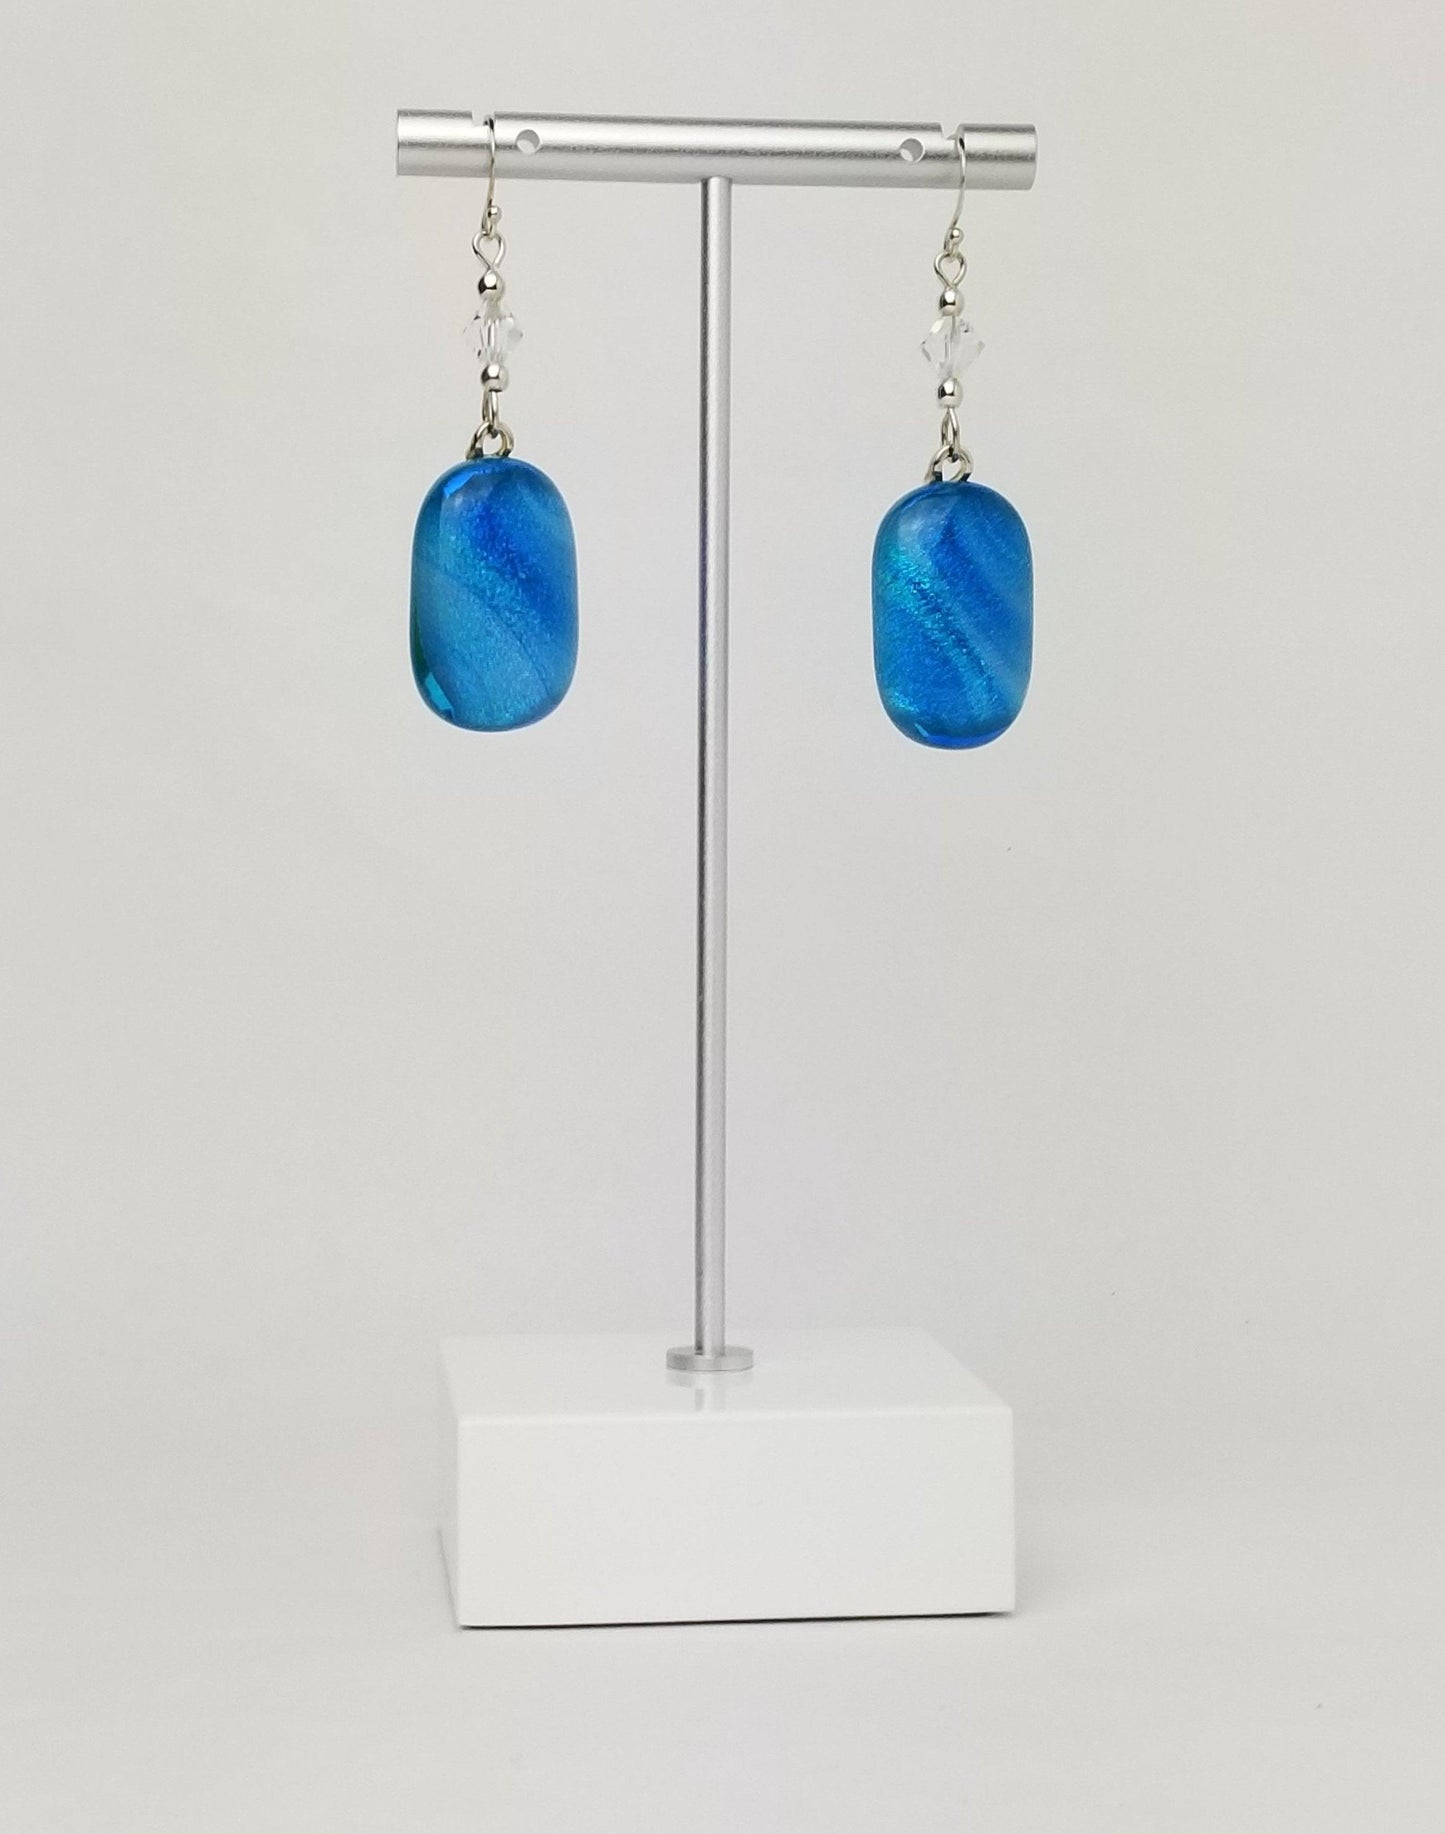 Blue Galaxy sparkle fused glass pierced dangle earrings, silver wire hooks with crystal bead accents